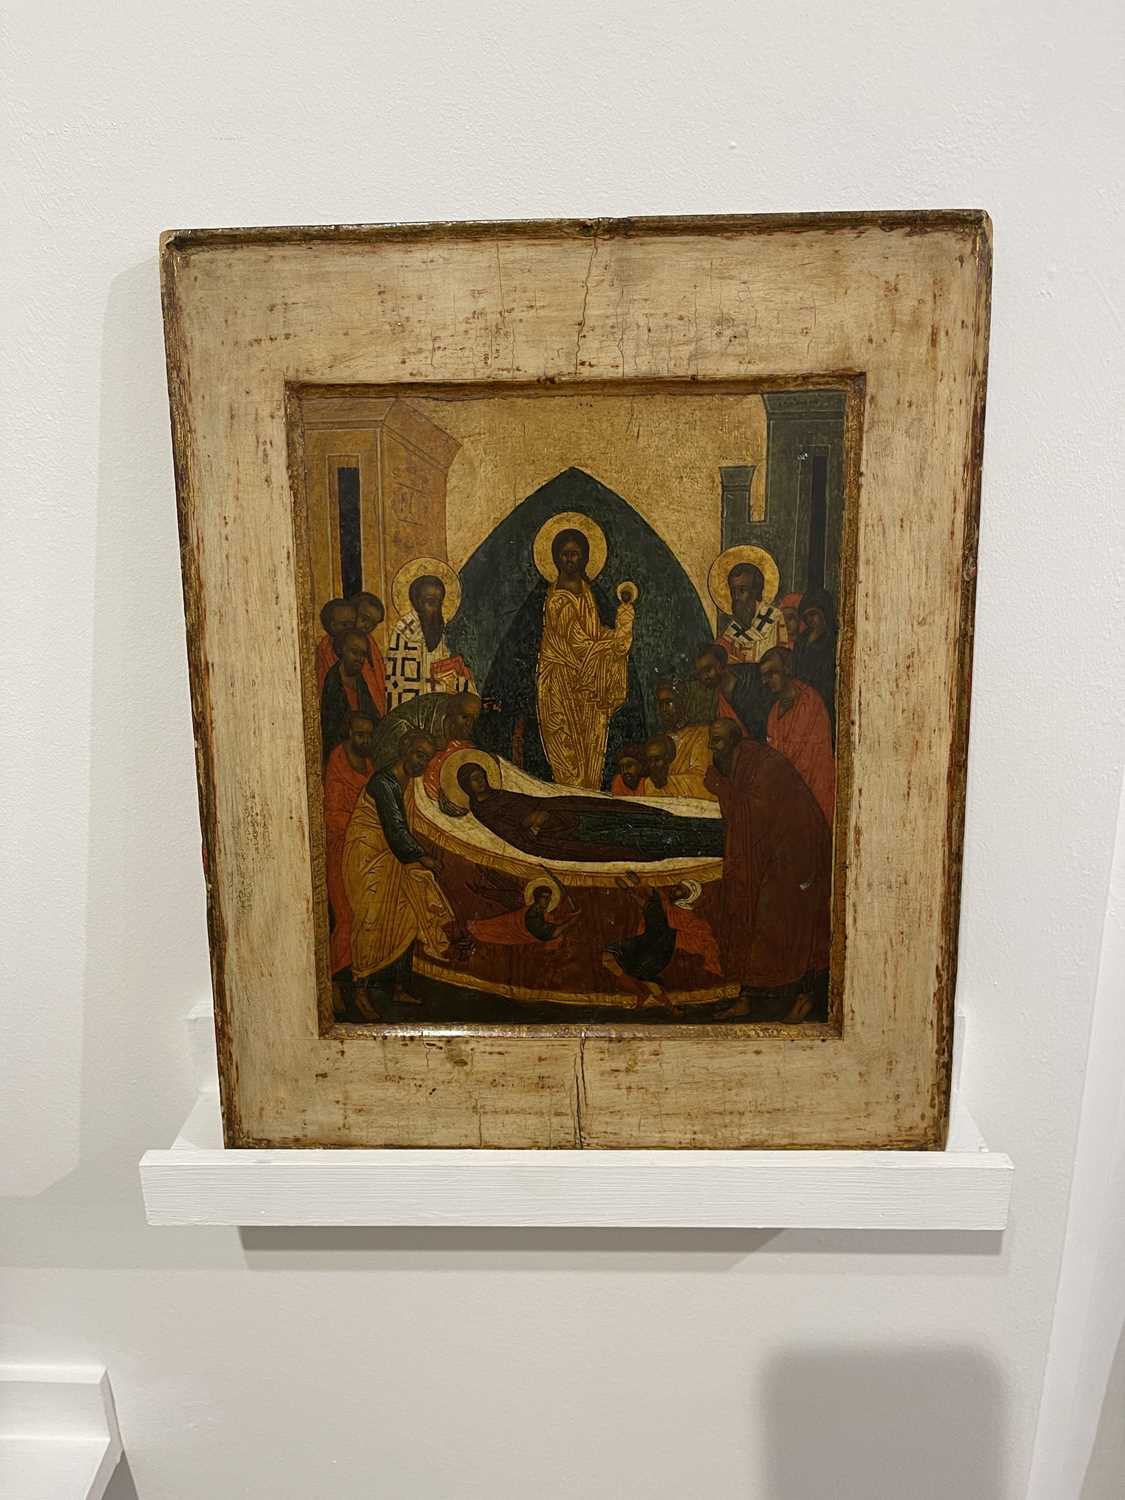 An icon of the Dormition of the Mother of God, - Image 16 of 67